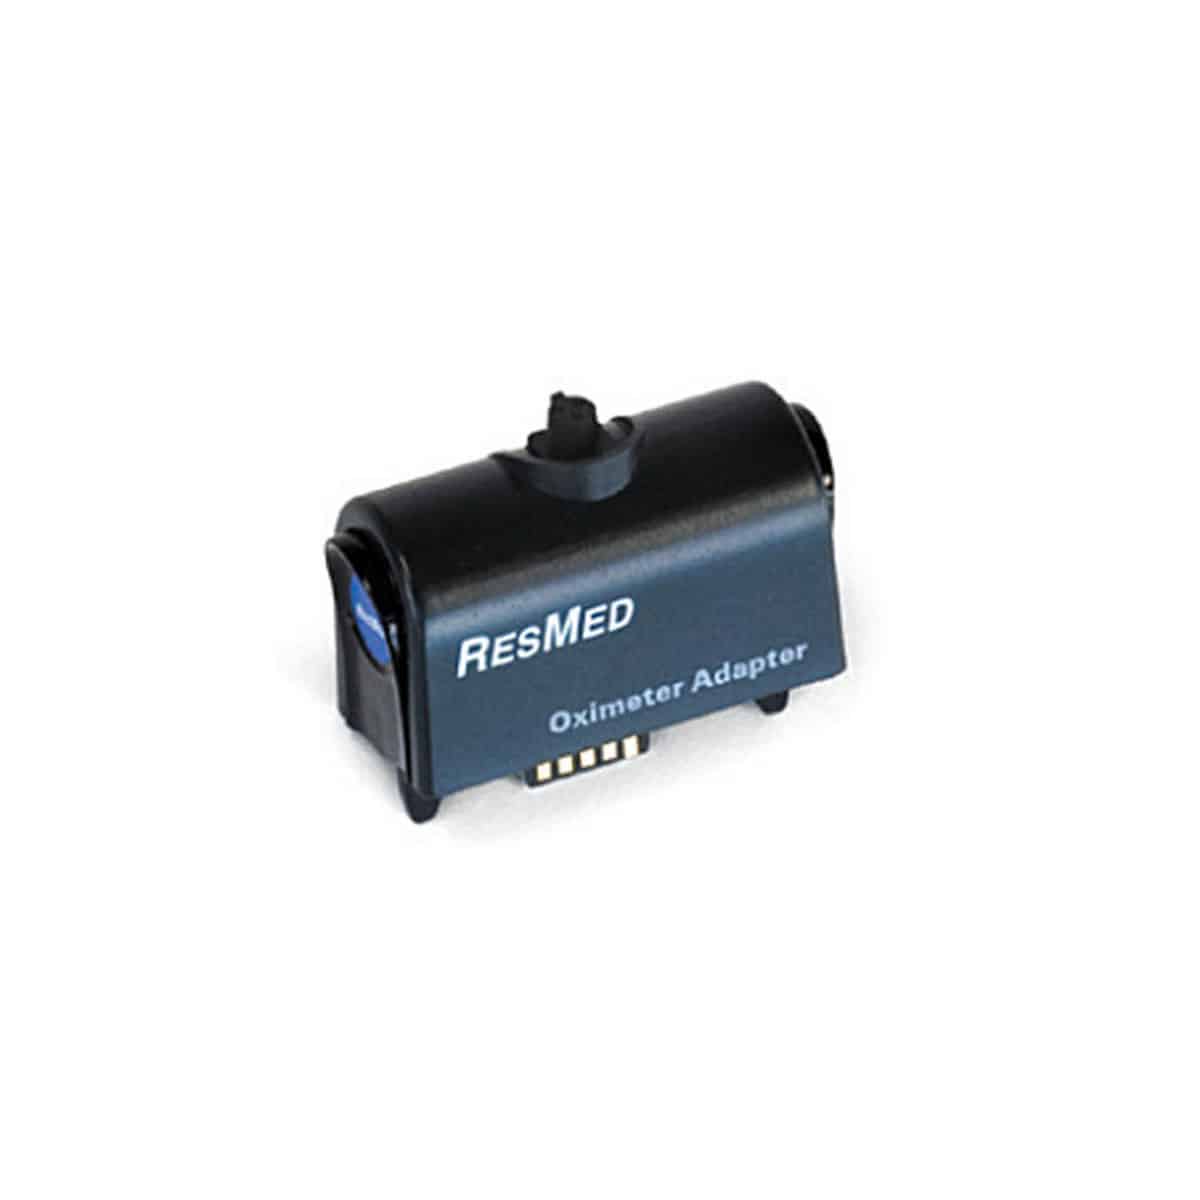 Featured image for “ResMed S9 Oximeter Adapter”